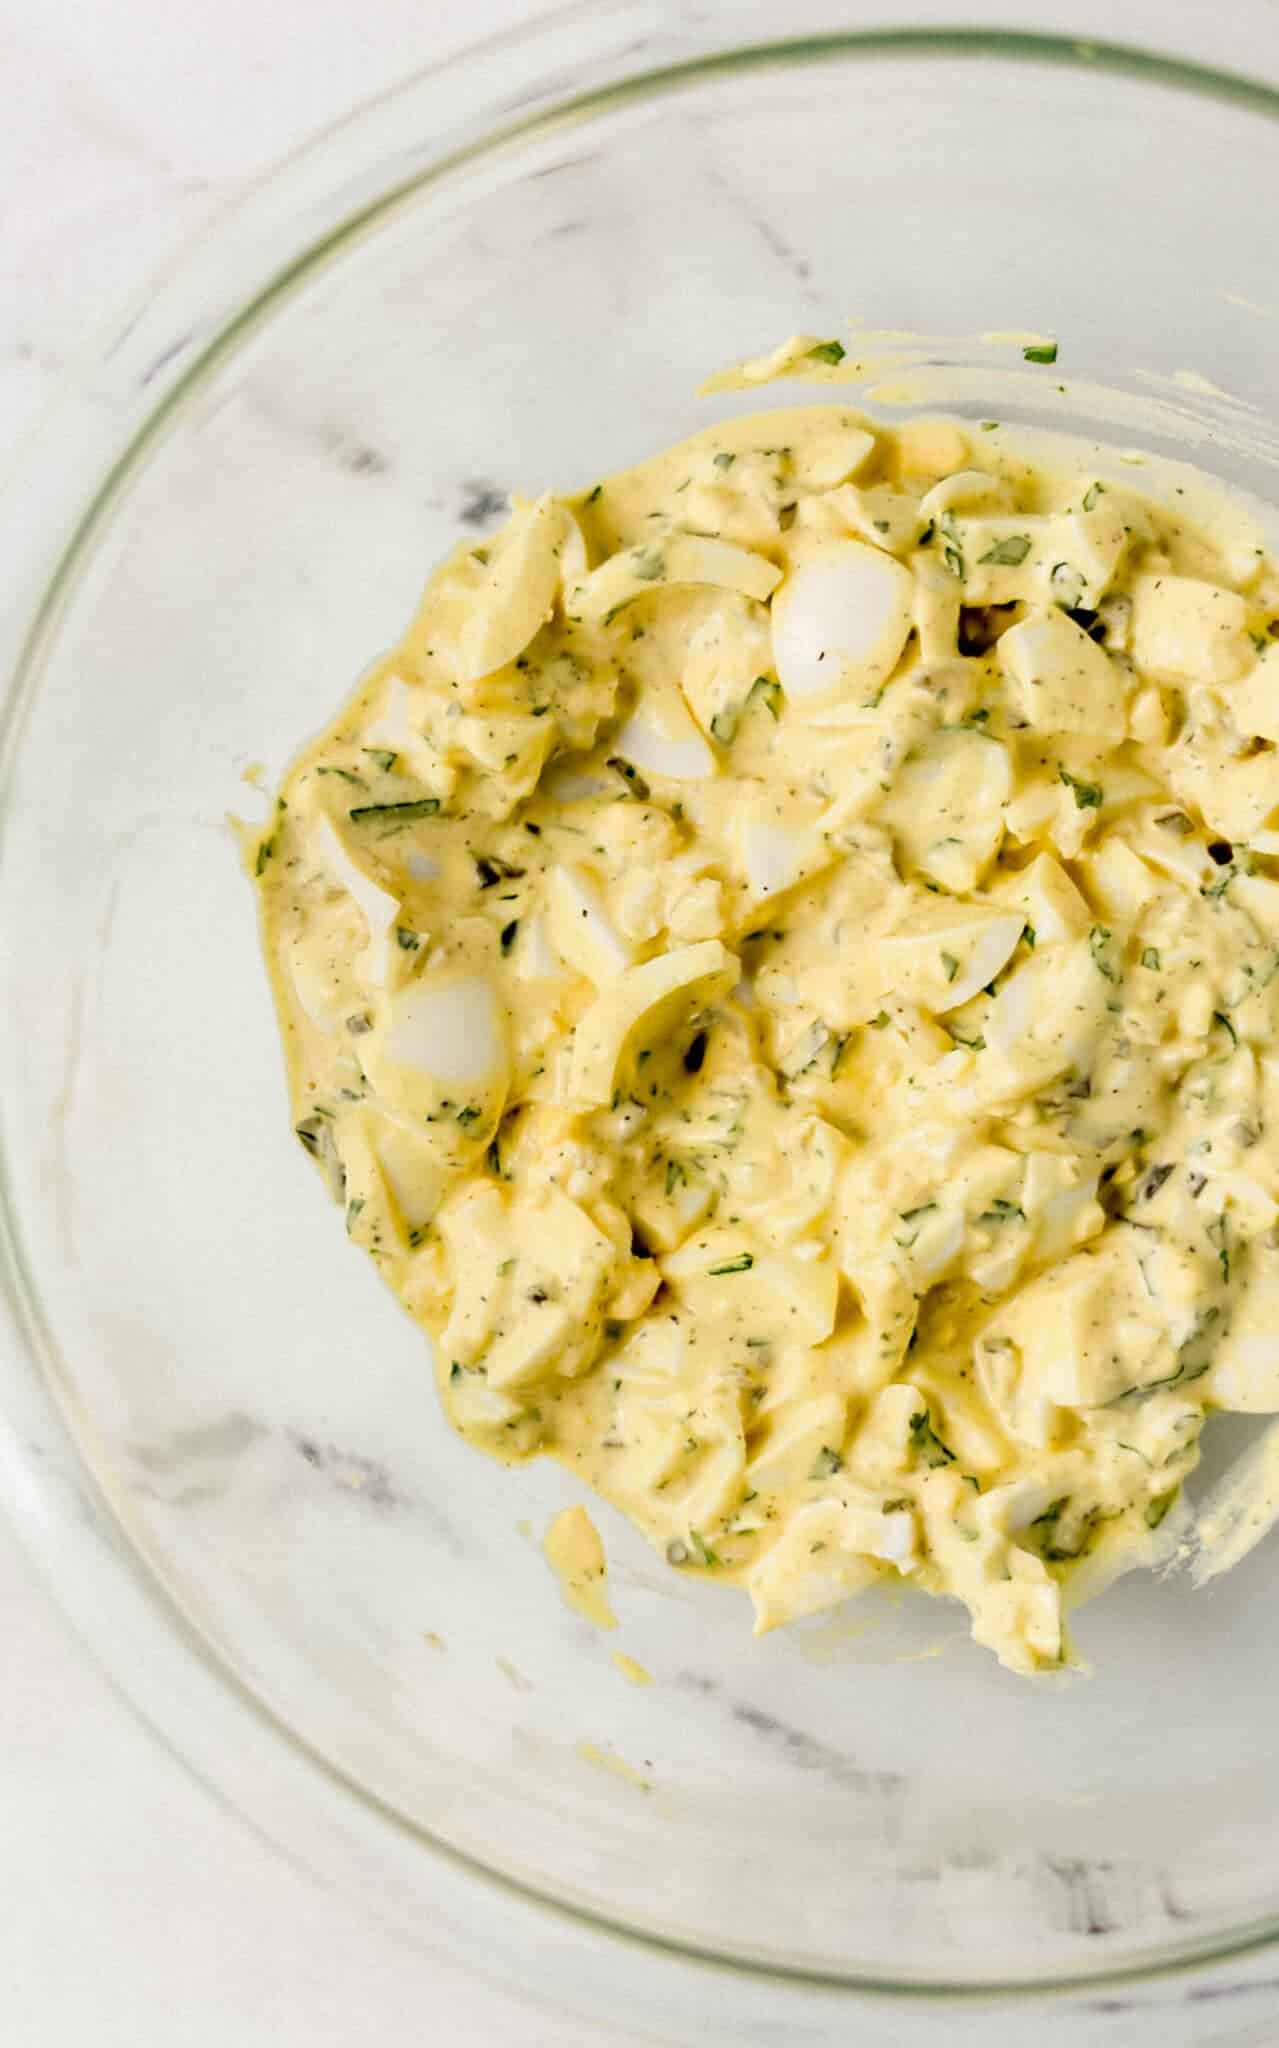 egg salad ingredients combined in glass mixing bowl 